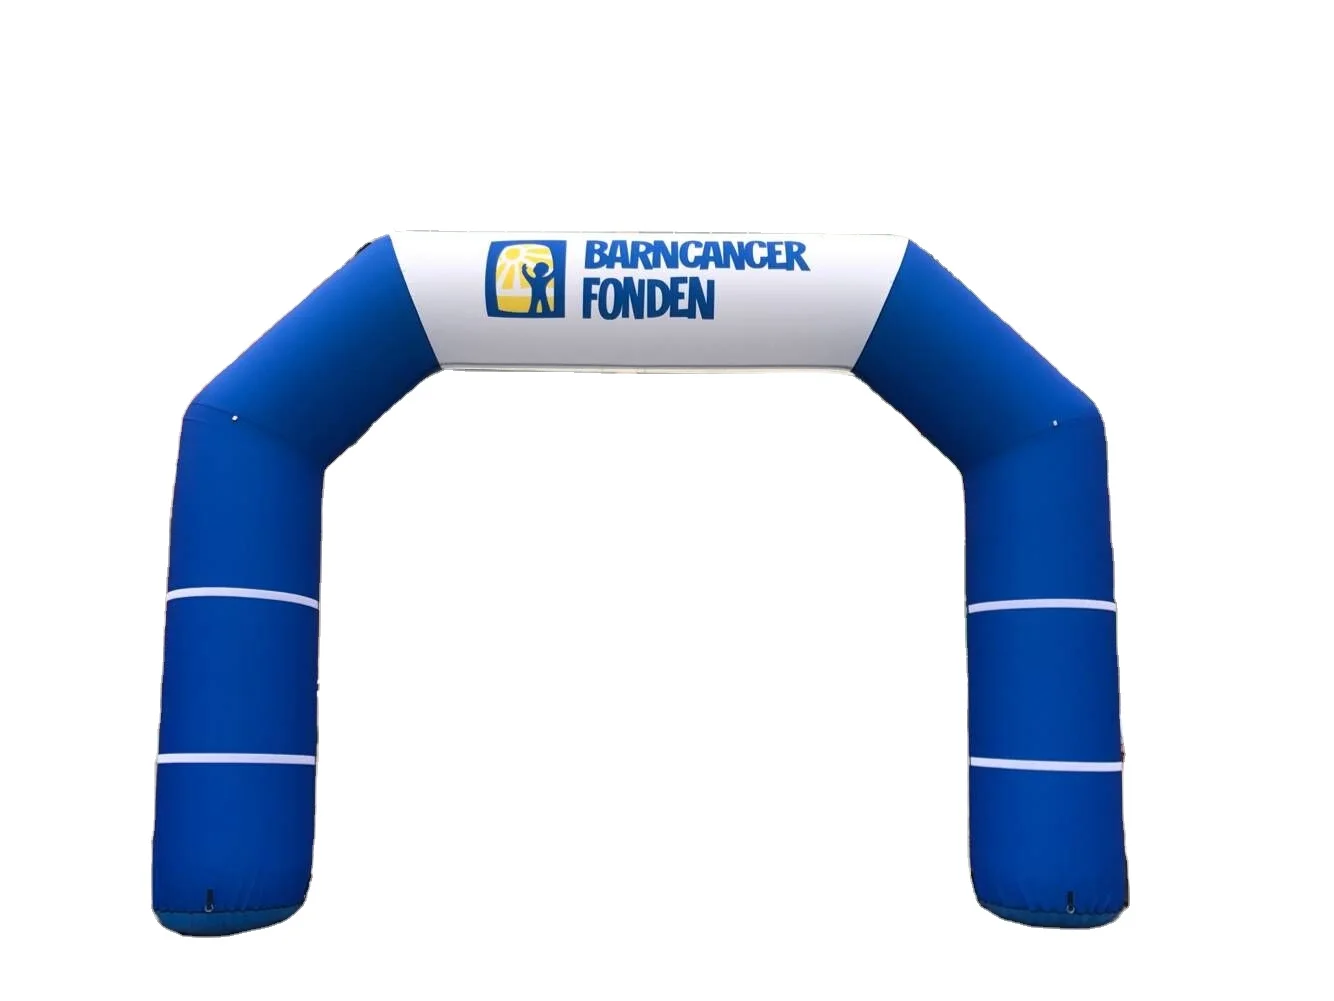 Hot Sale sports running entrance Finish line arch door air arch//